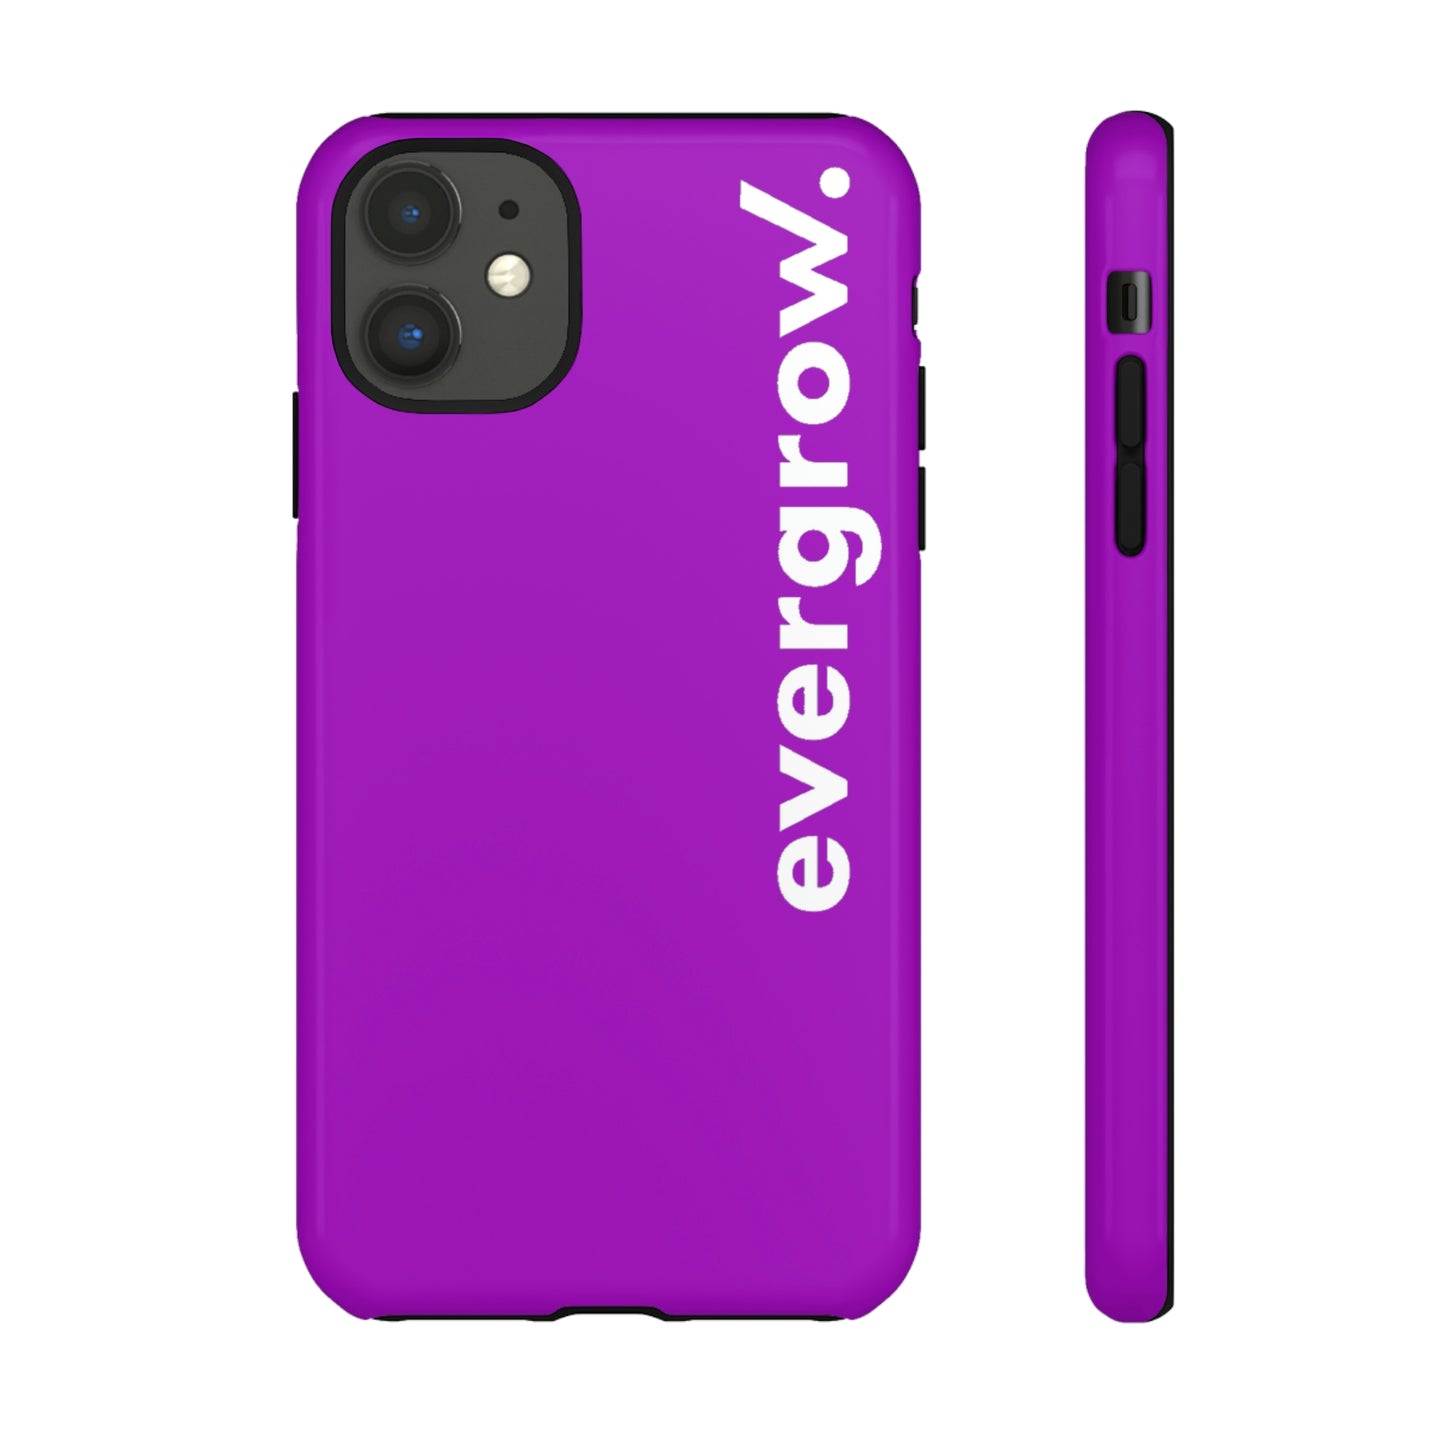 Worldwide - Tough Cases with case in EverGrow purple and white evergrow lettering